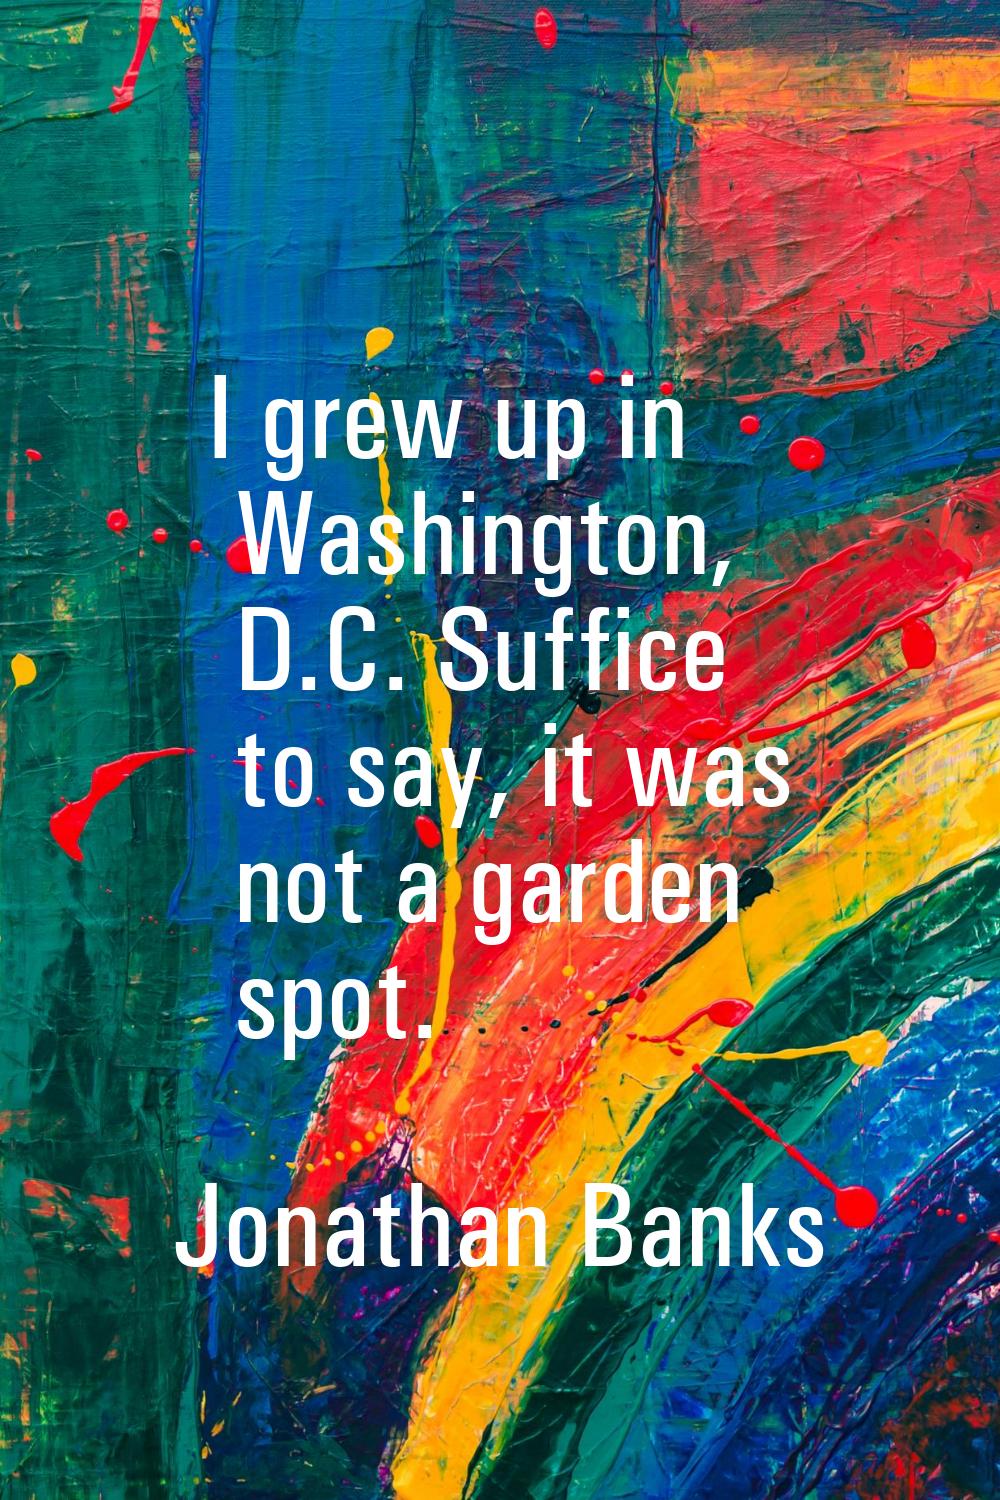 I grew up in Washington, D.C. Suffice to say, it was not a garden spot.